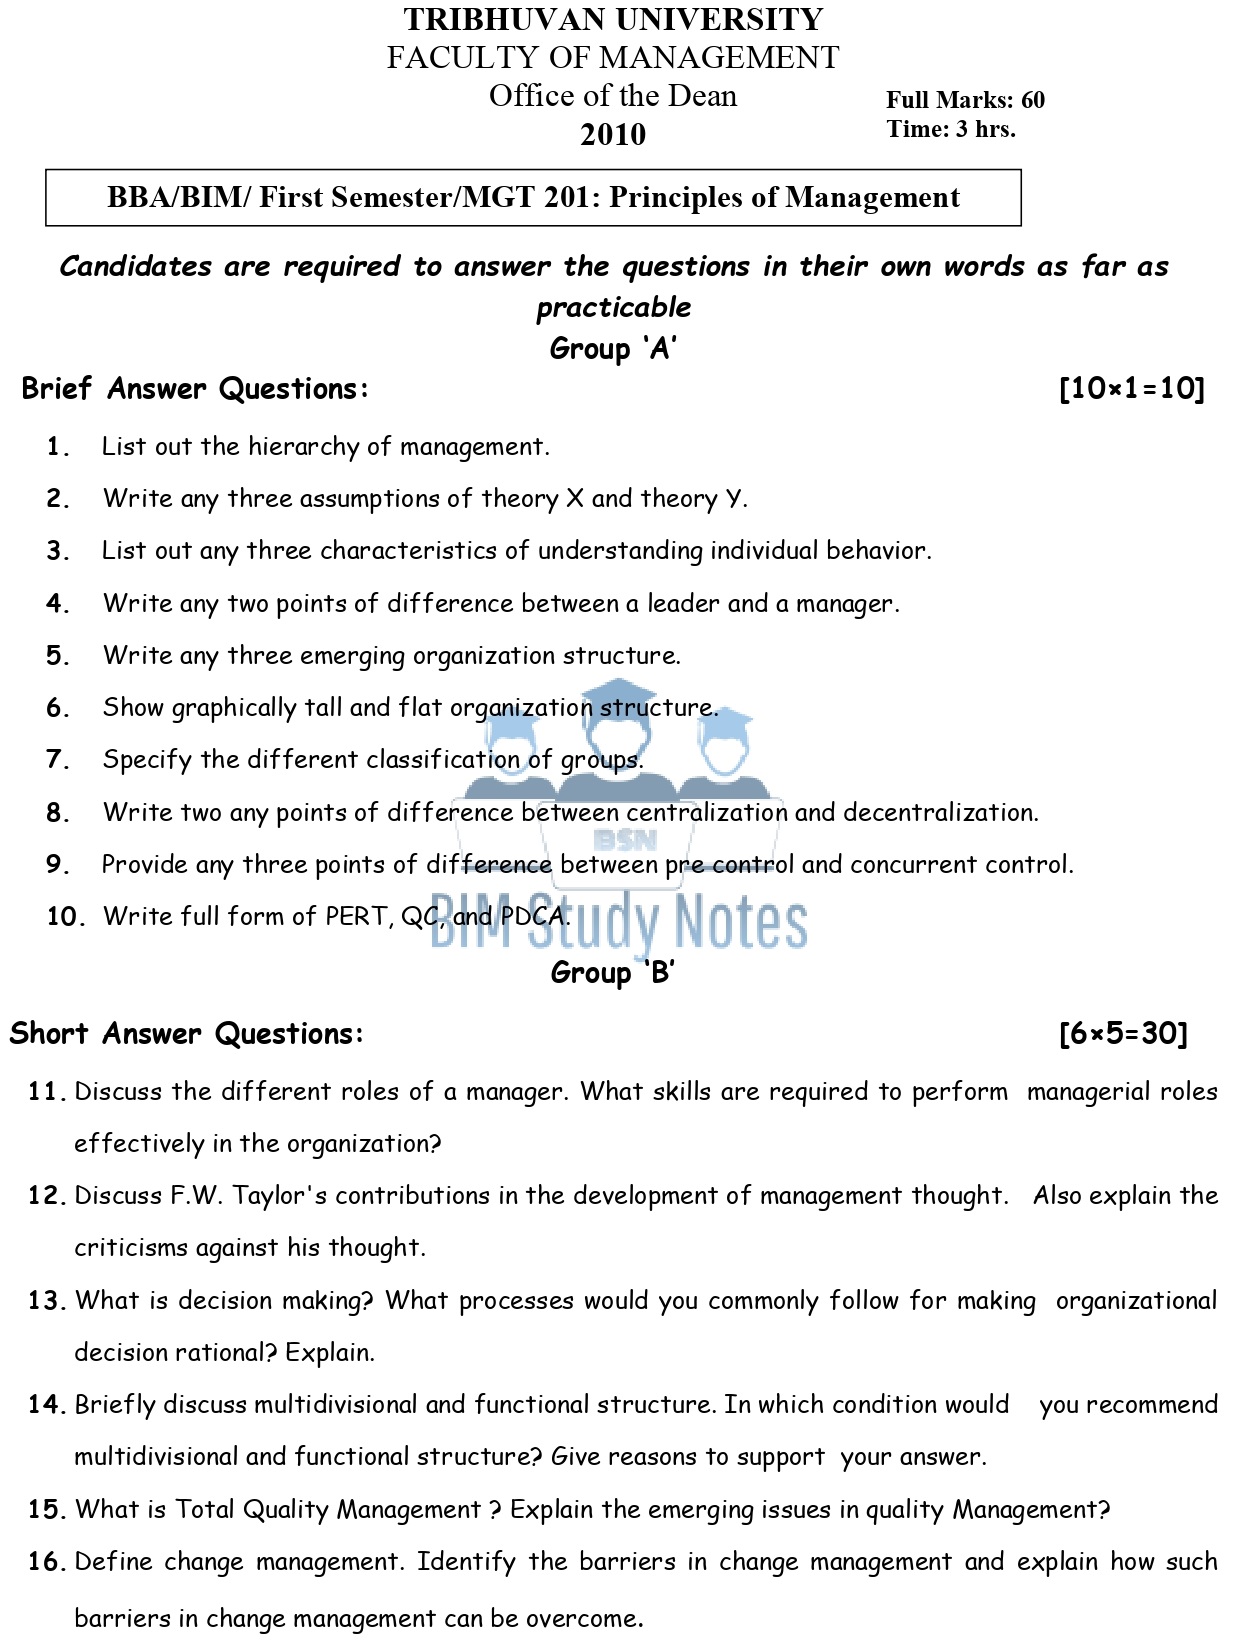 Principles of Management_watermark_page-0001